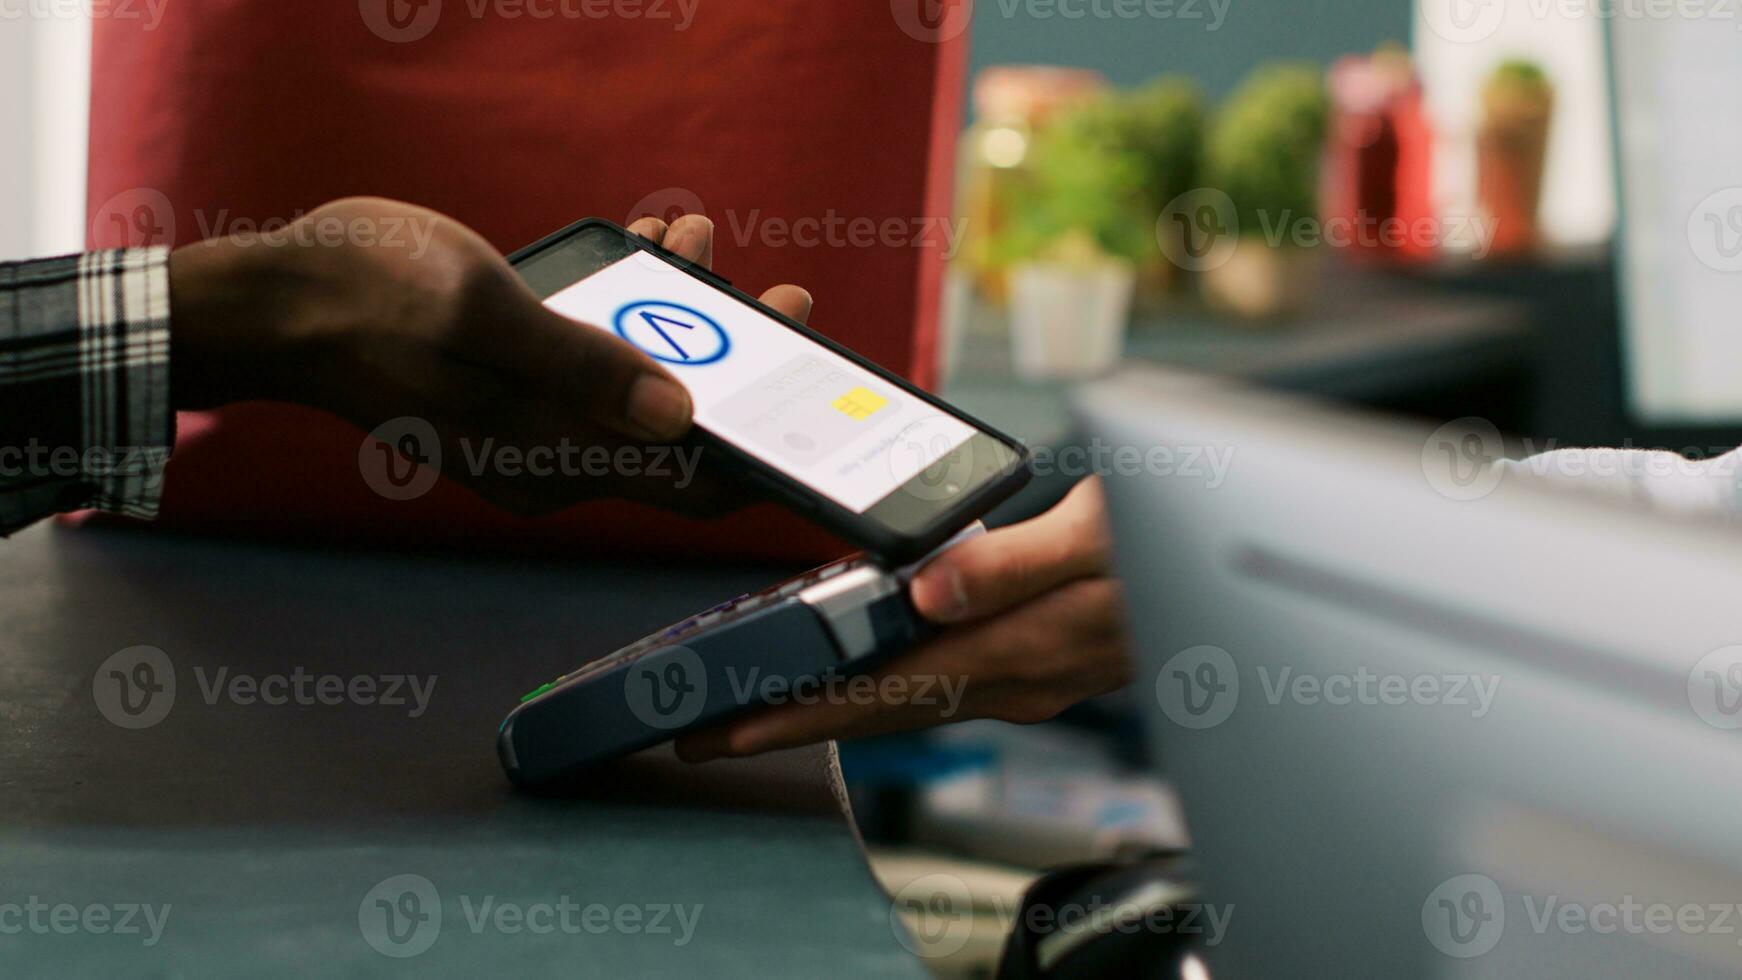 Customer paying with mobile phone at pos terminal at fashion store counter desk, buying fashionable clothes. African american man shopping for casual wear in modern boutique. Fashion concept photo